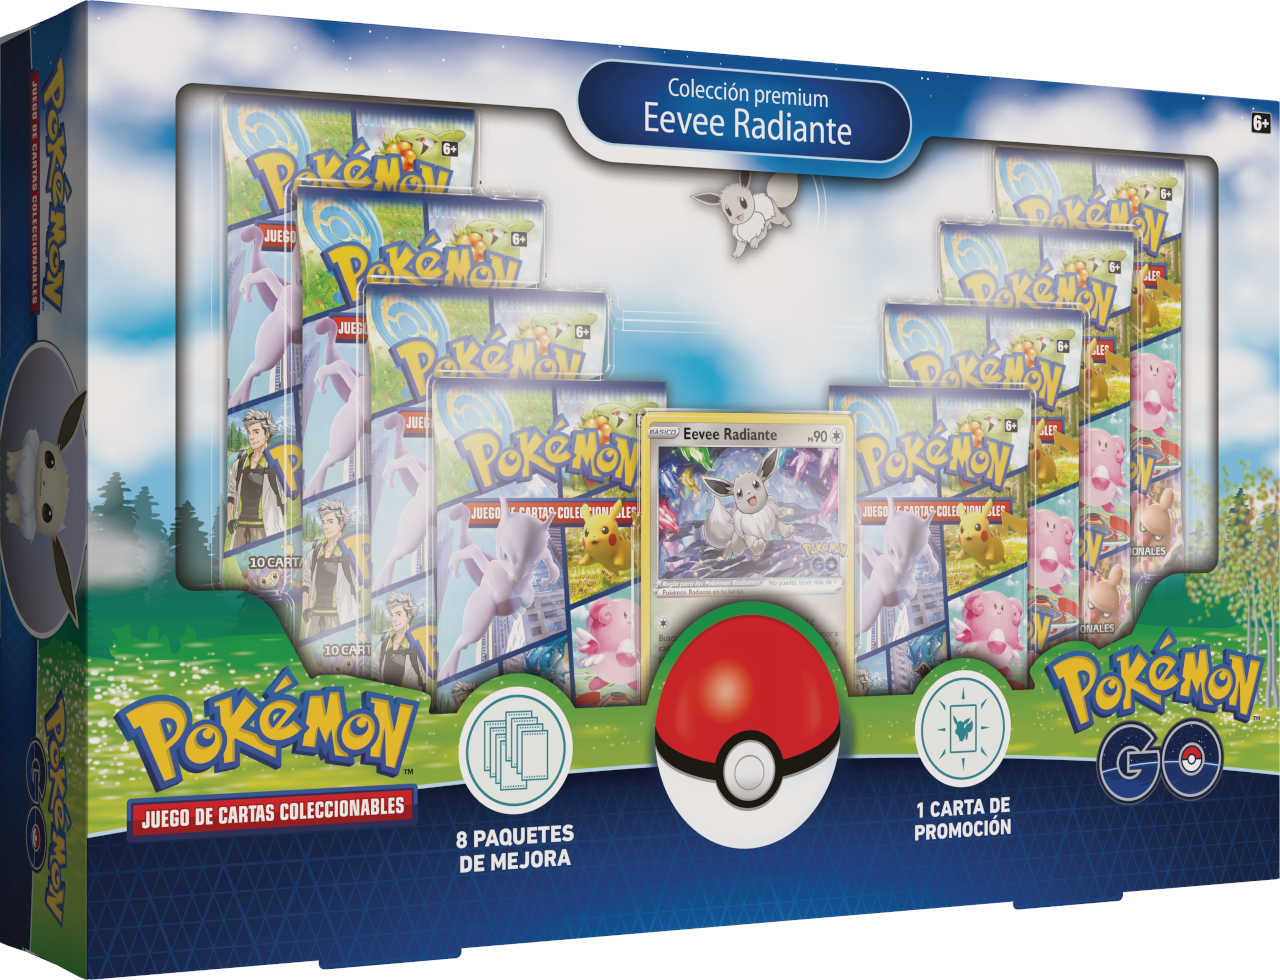 Pokémon GO arrives as an expansion to Pokémon TCG and we tell you what it is